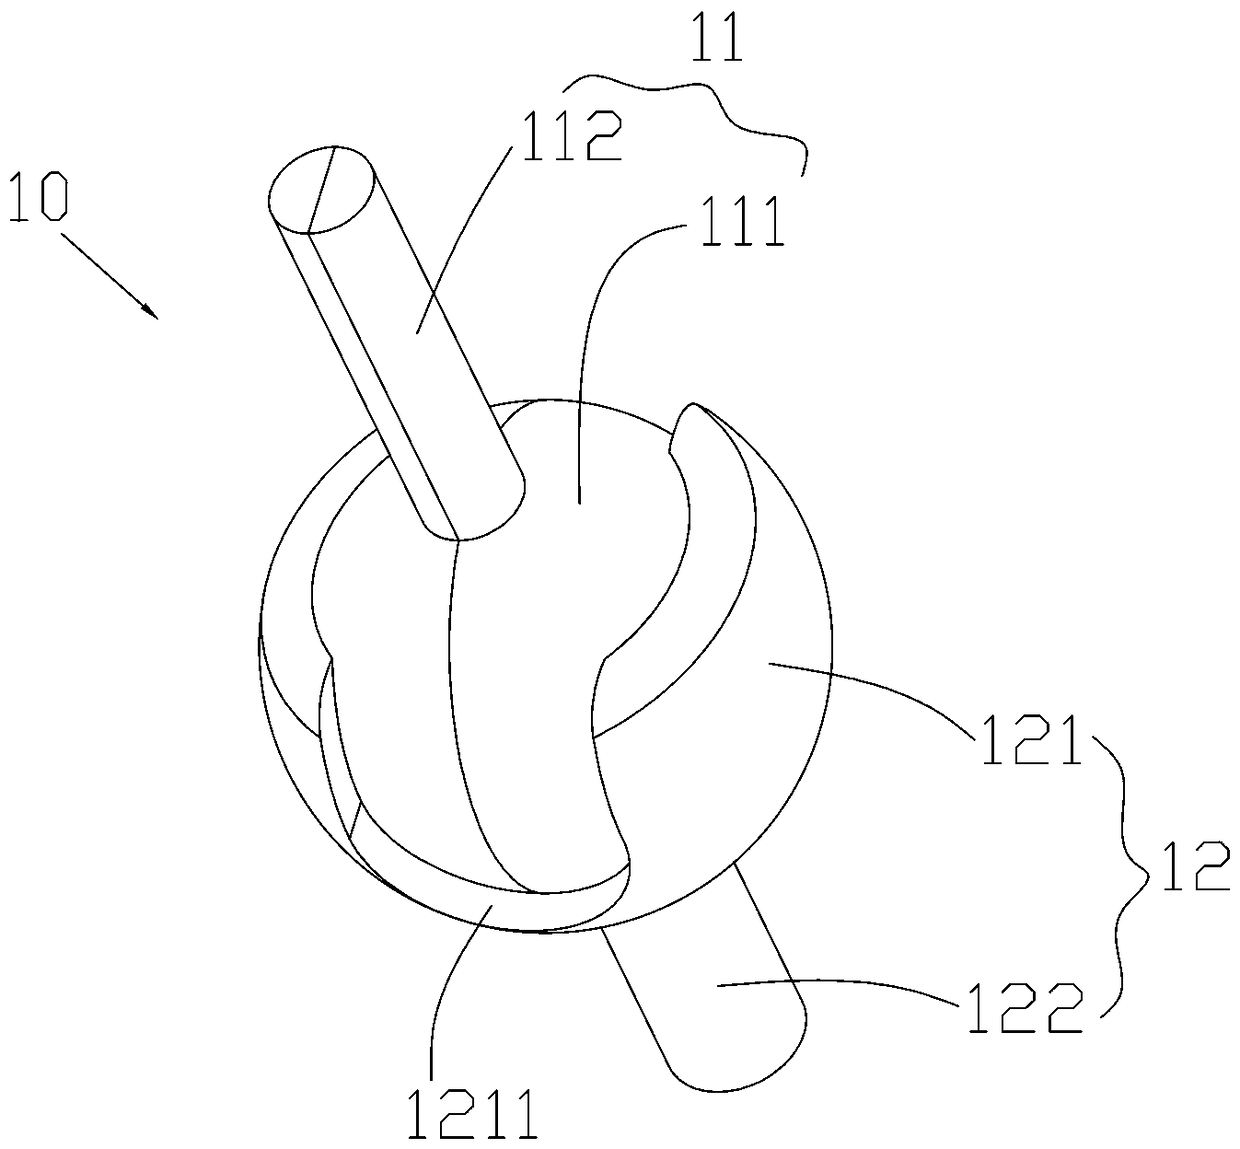 Ball socket joint and toy